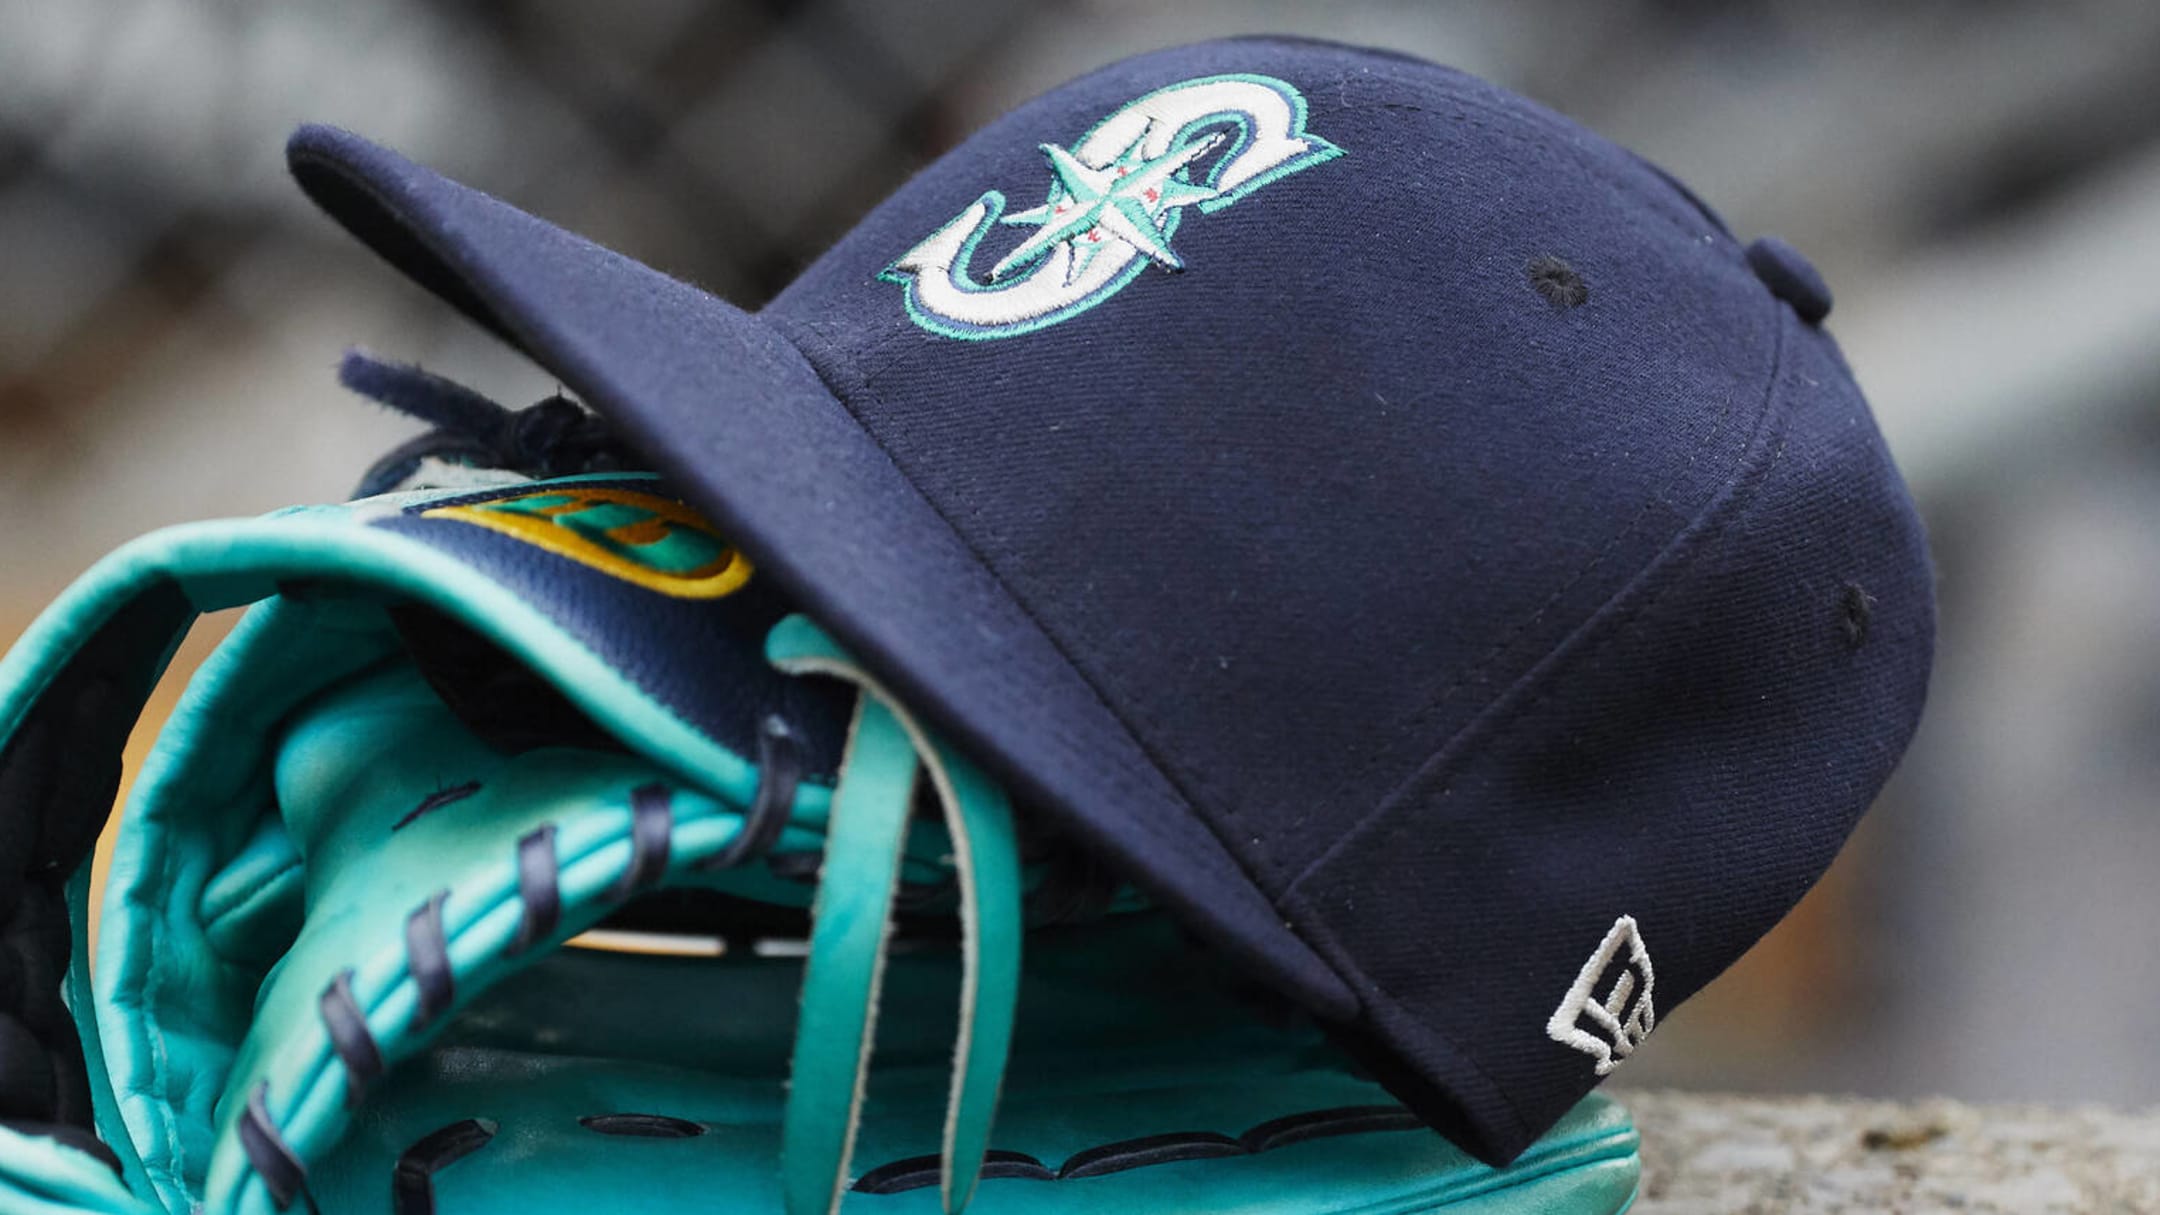 Mariners to take full control of ROOT Sports NW, clouding team's